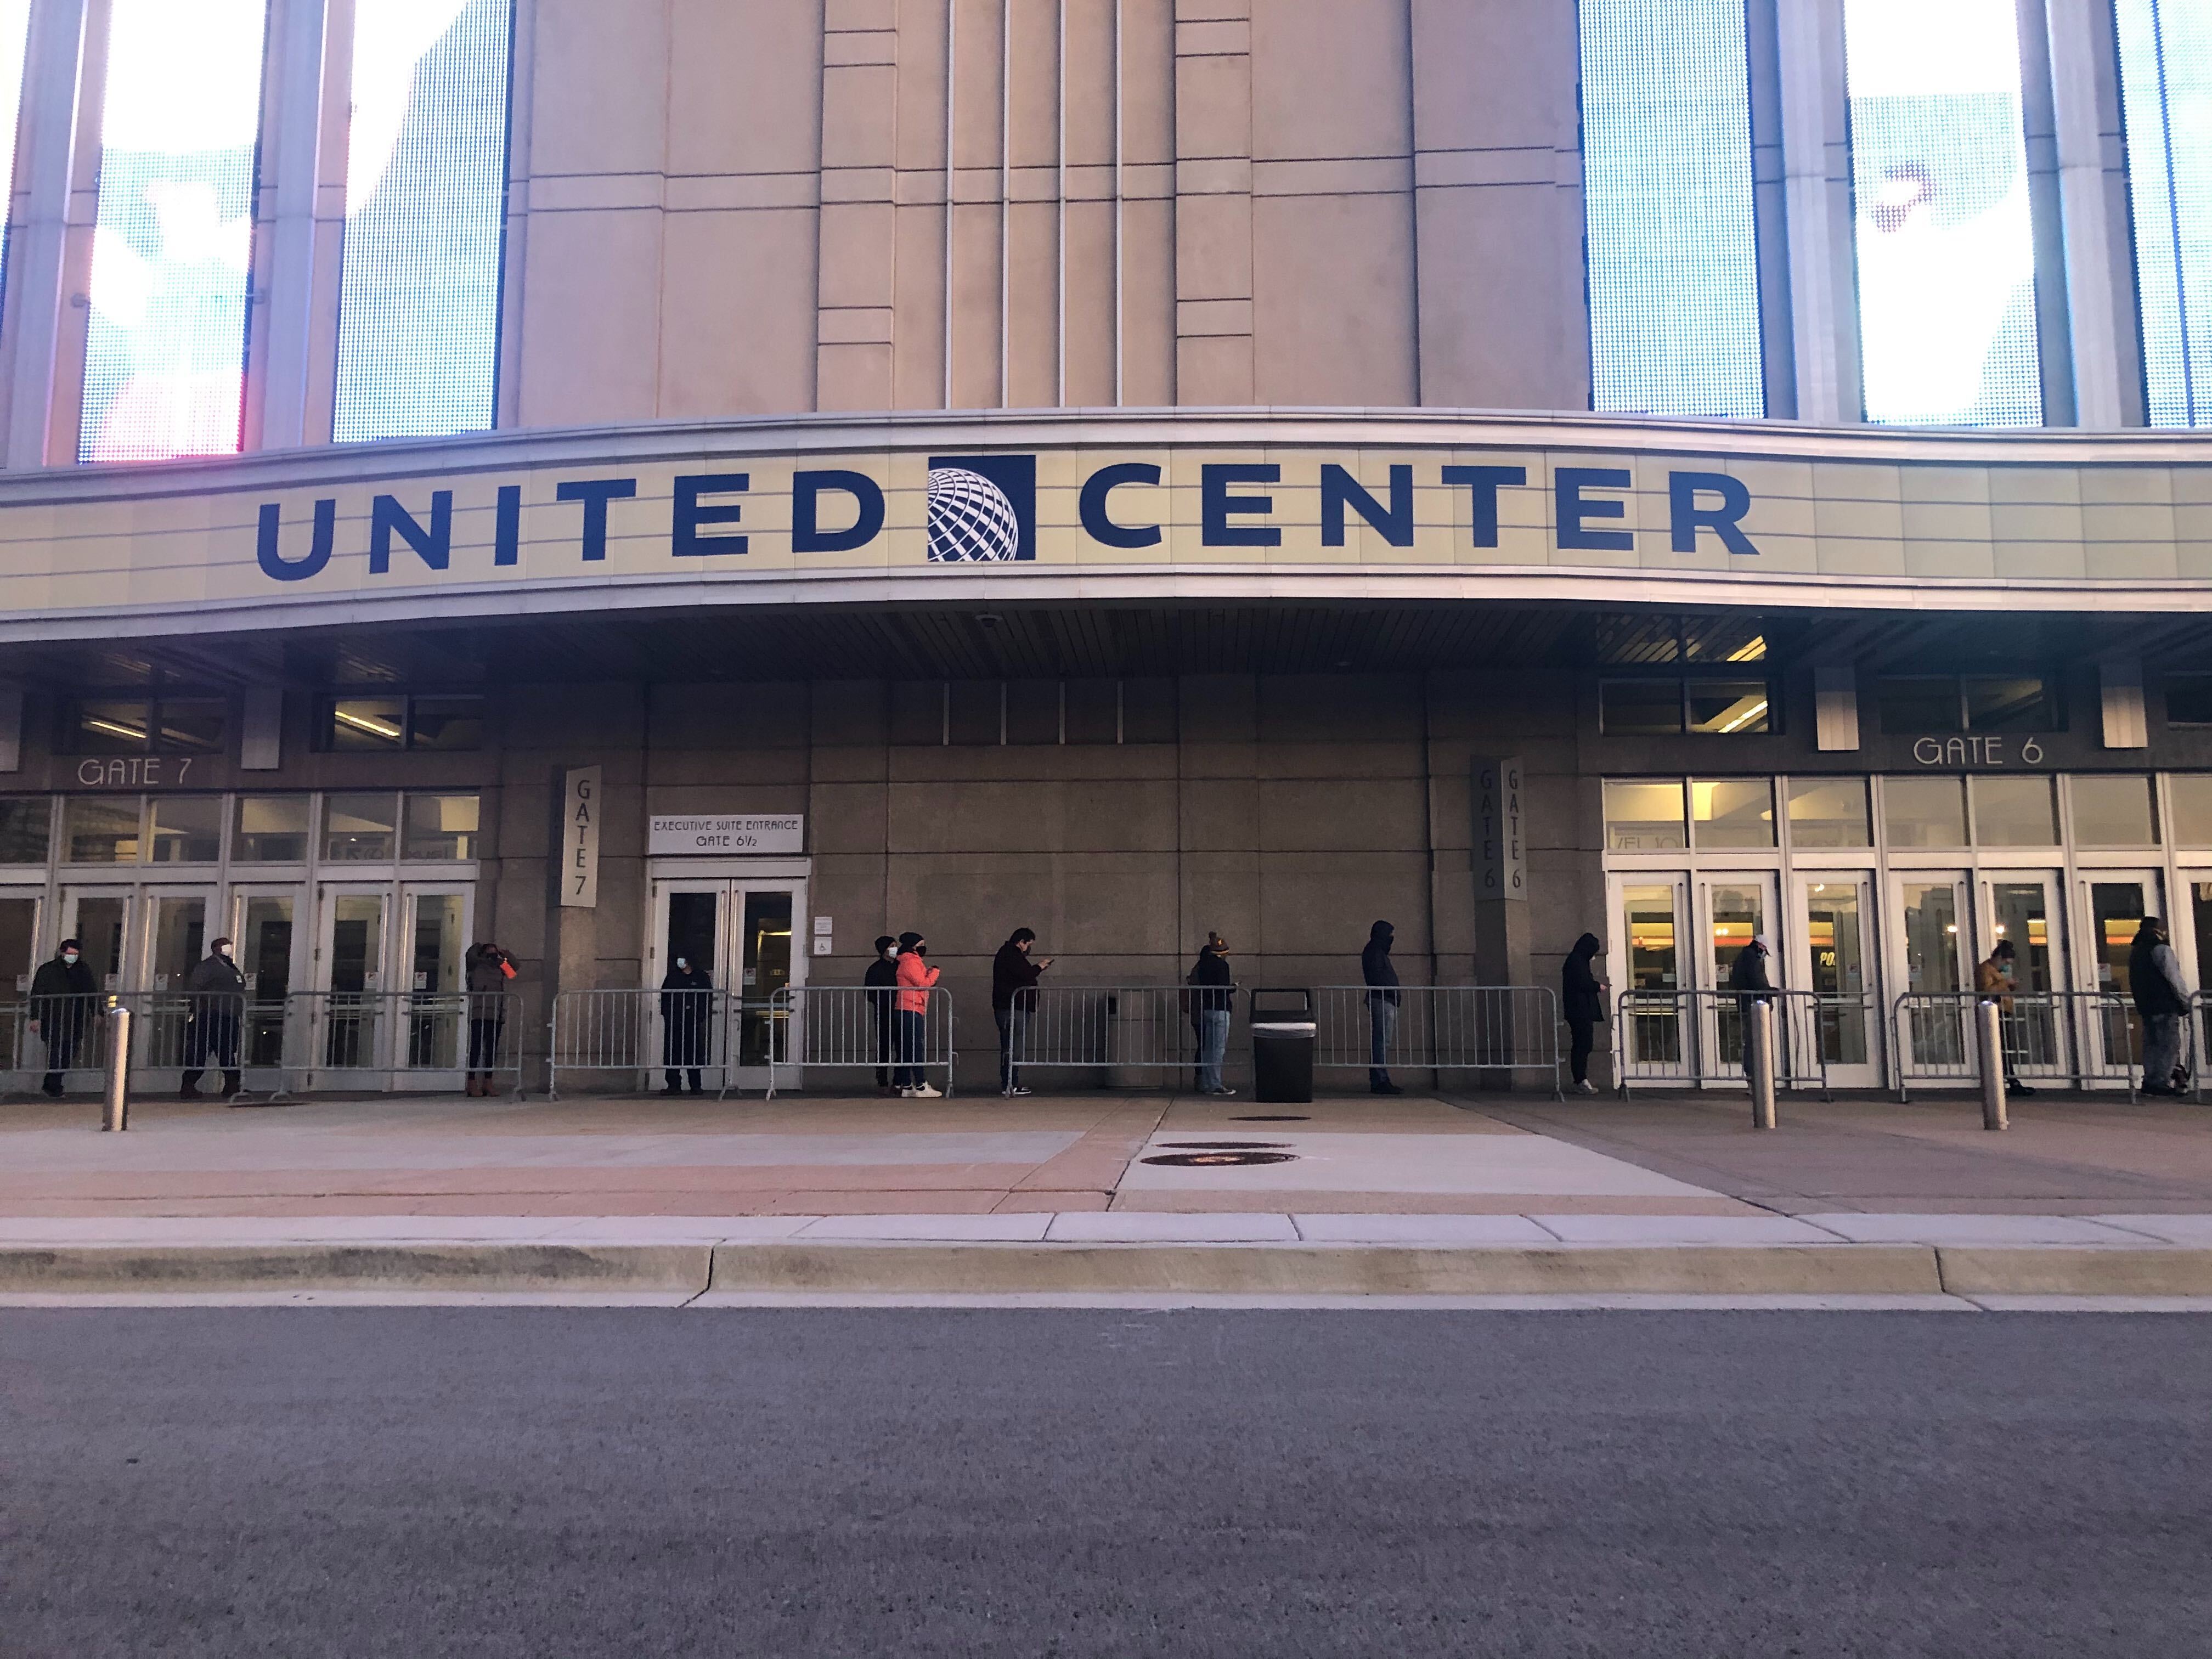 United Center Parking Lots To Be Used As Mass Vaccination Site As Early As March